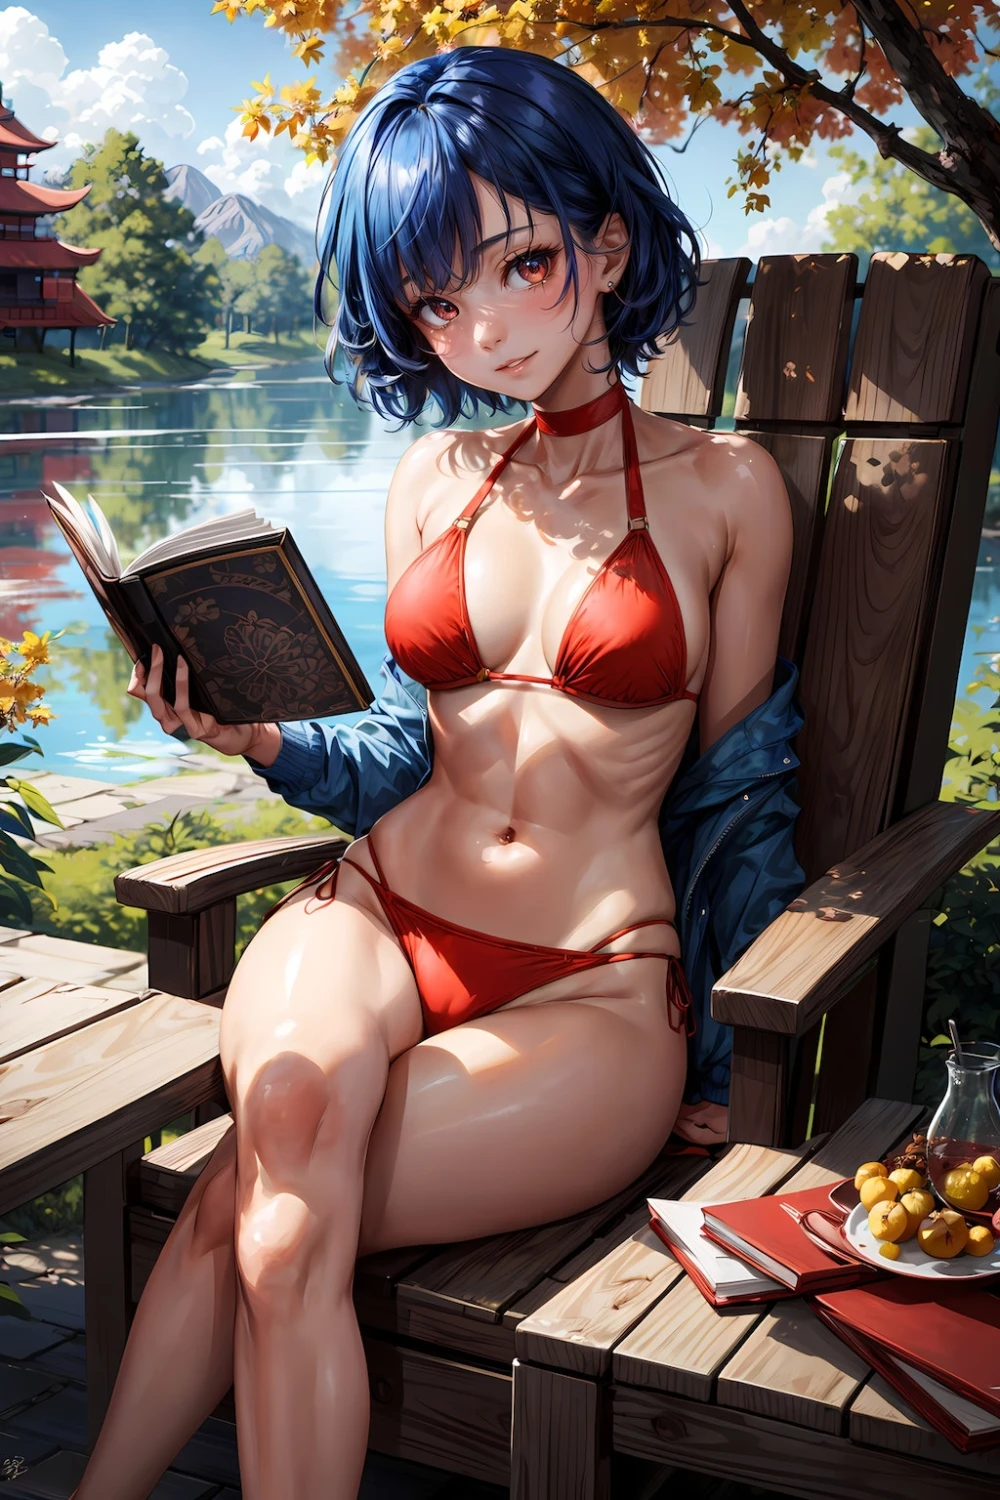 reading-anime-style-all-ages-29